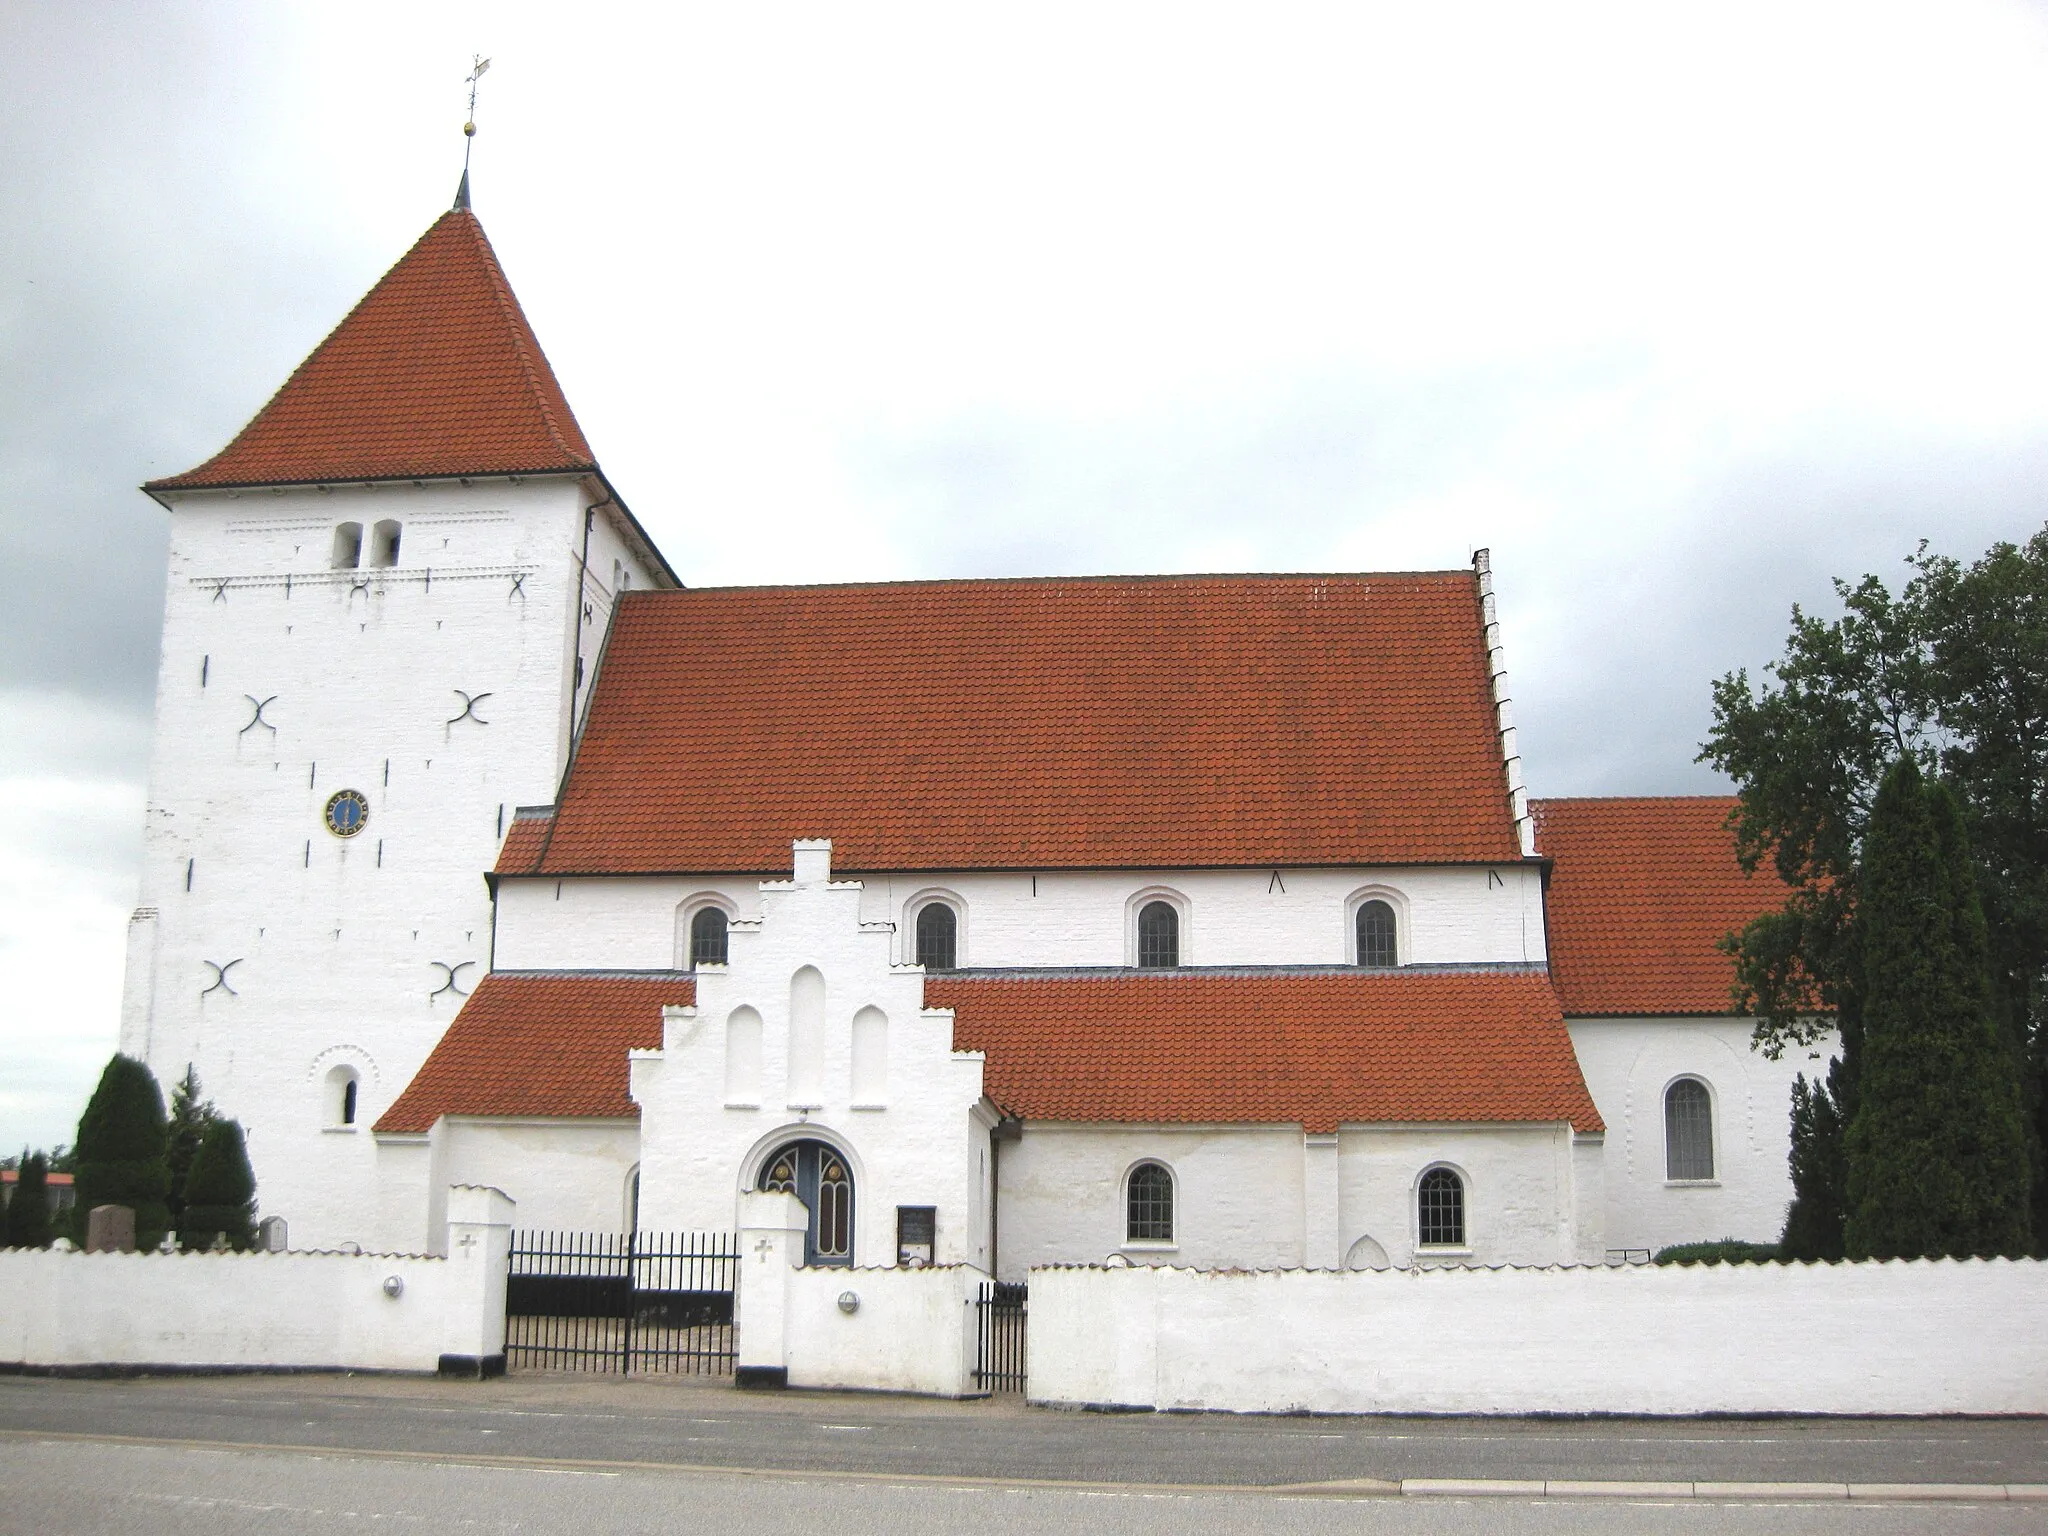 Photo showing: The church "Toreby Kirke" in the village "Toreby". The village is located on the island Lolland in east Denmark.